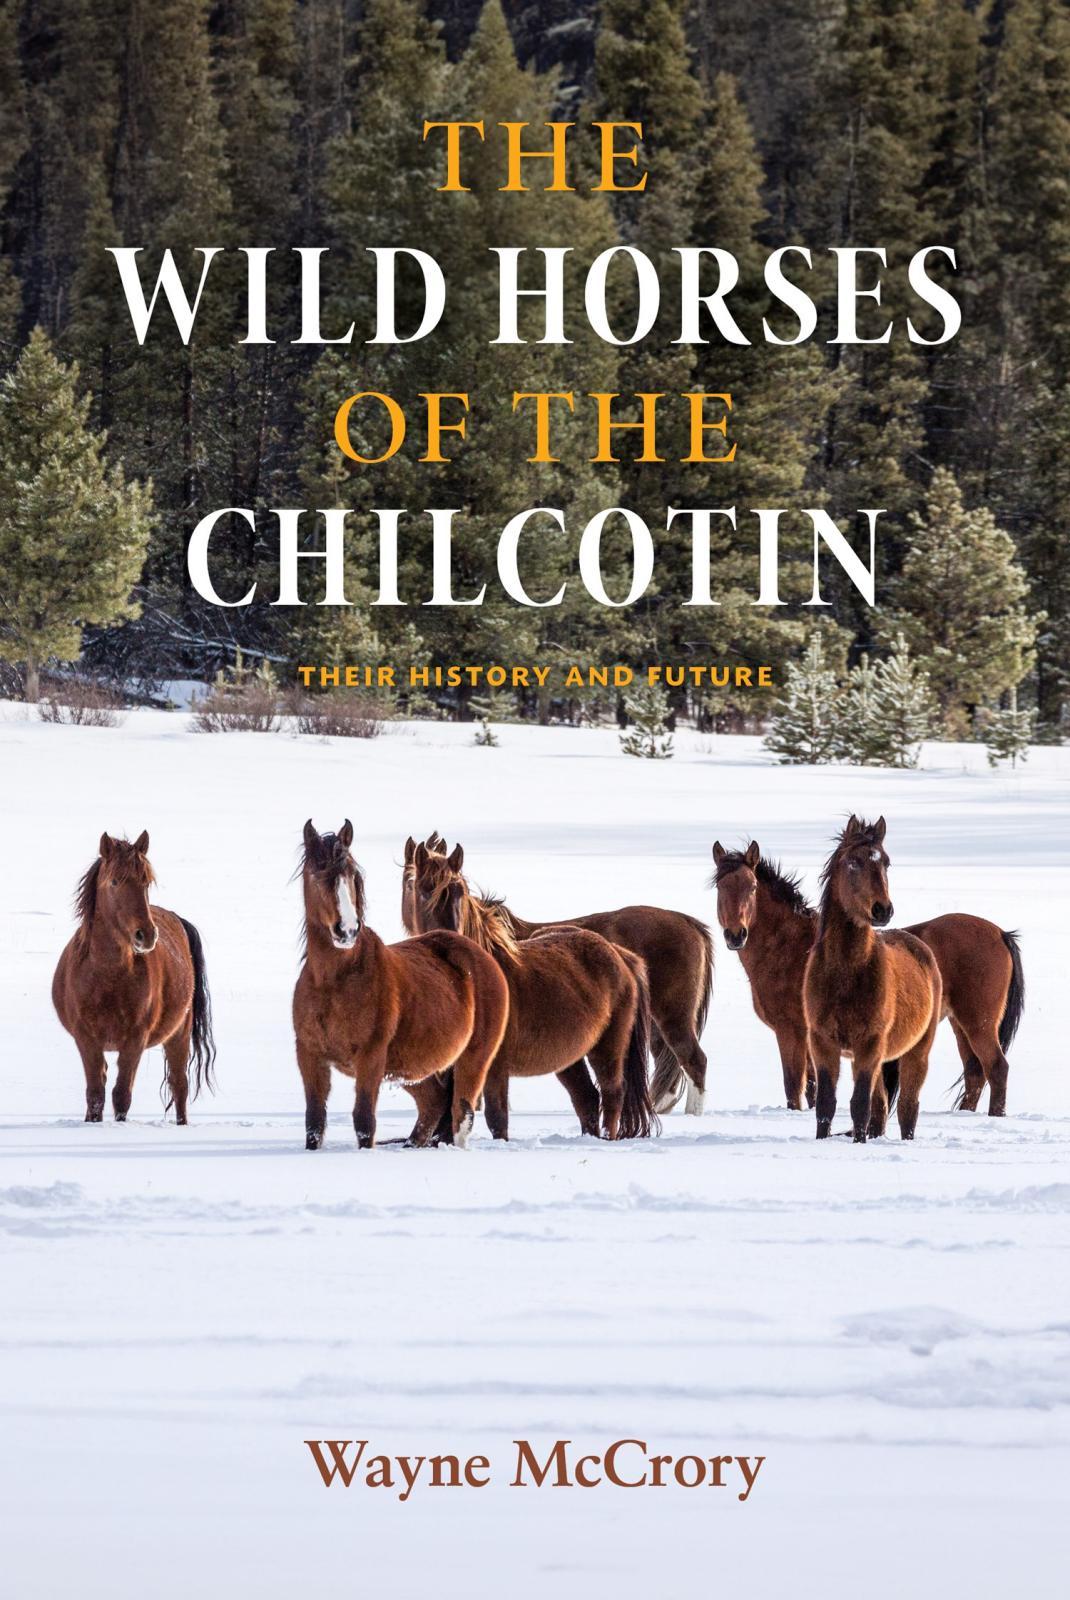 Book cover image for "Wild Horses Of The Chilcotin: Their History and Future" by Wayne McCrory